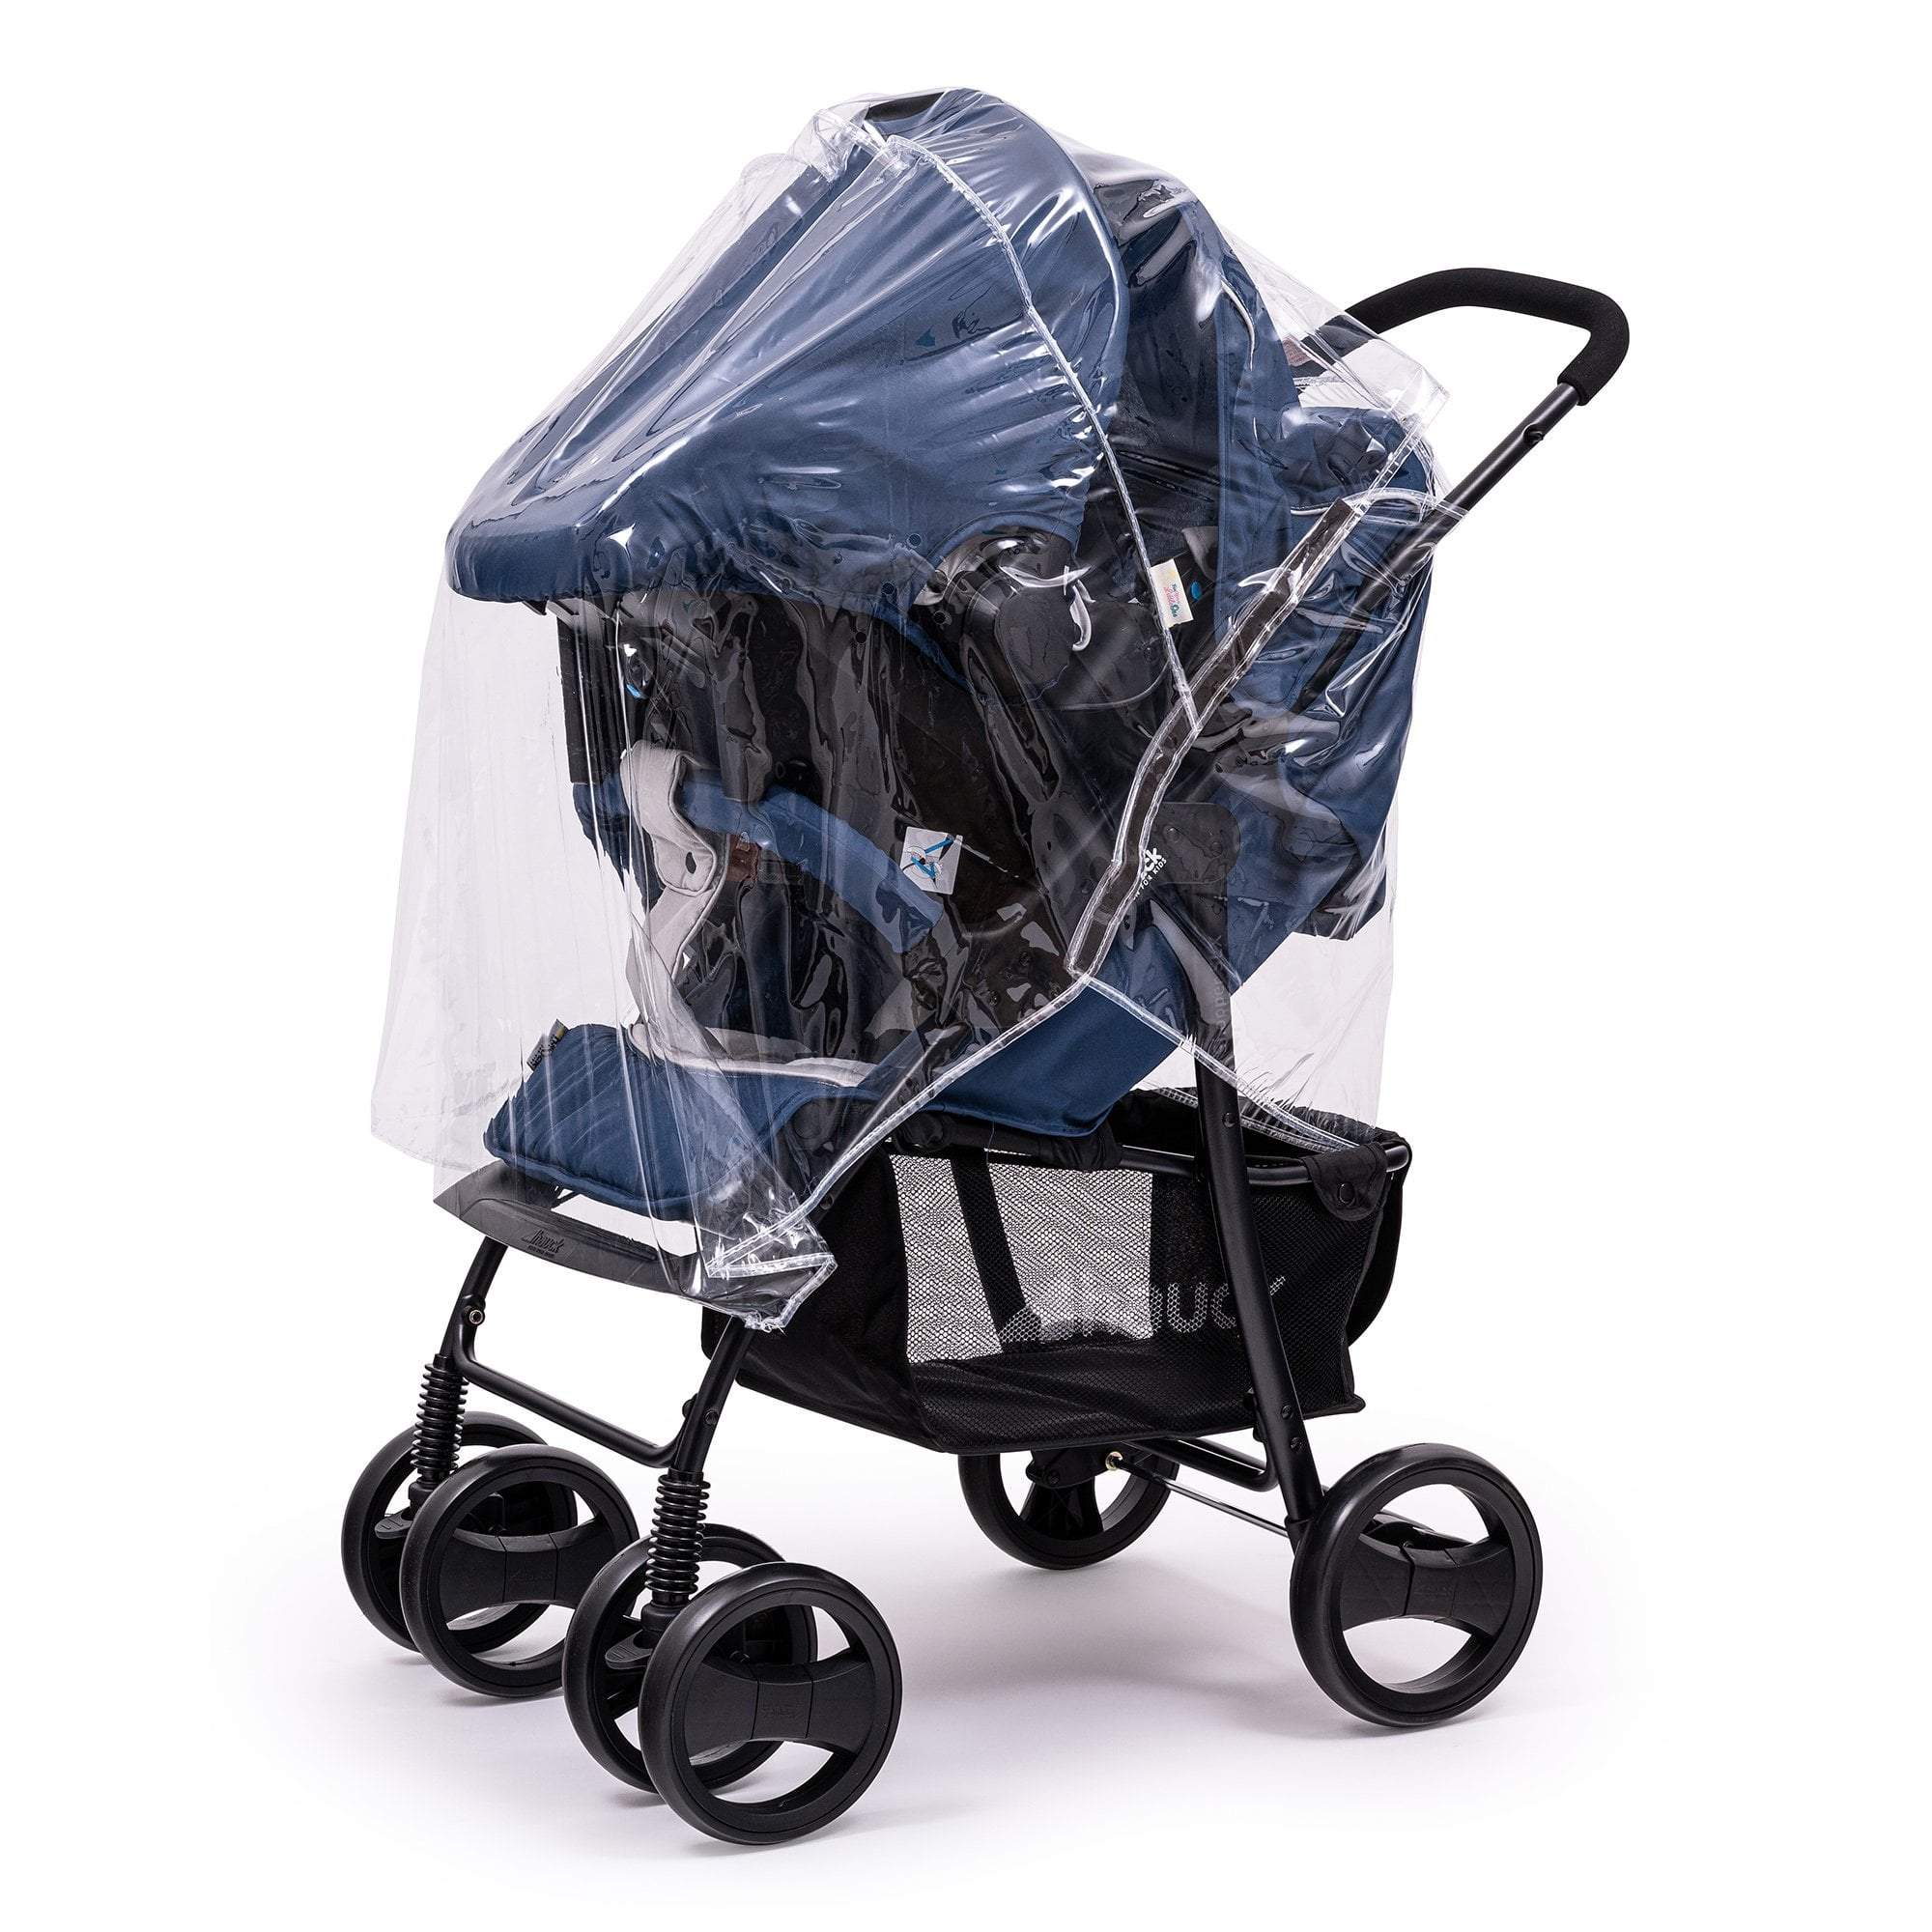 Travel System Raincover Compatible with Firstwheels - Fits All Models - For Your Little One